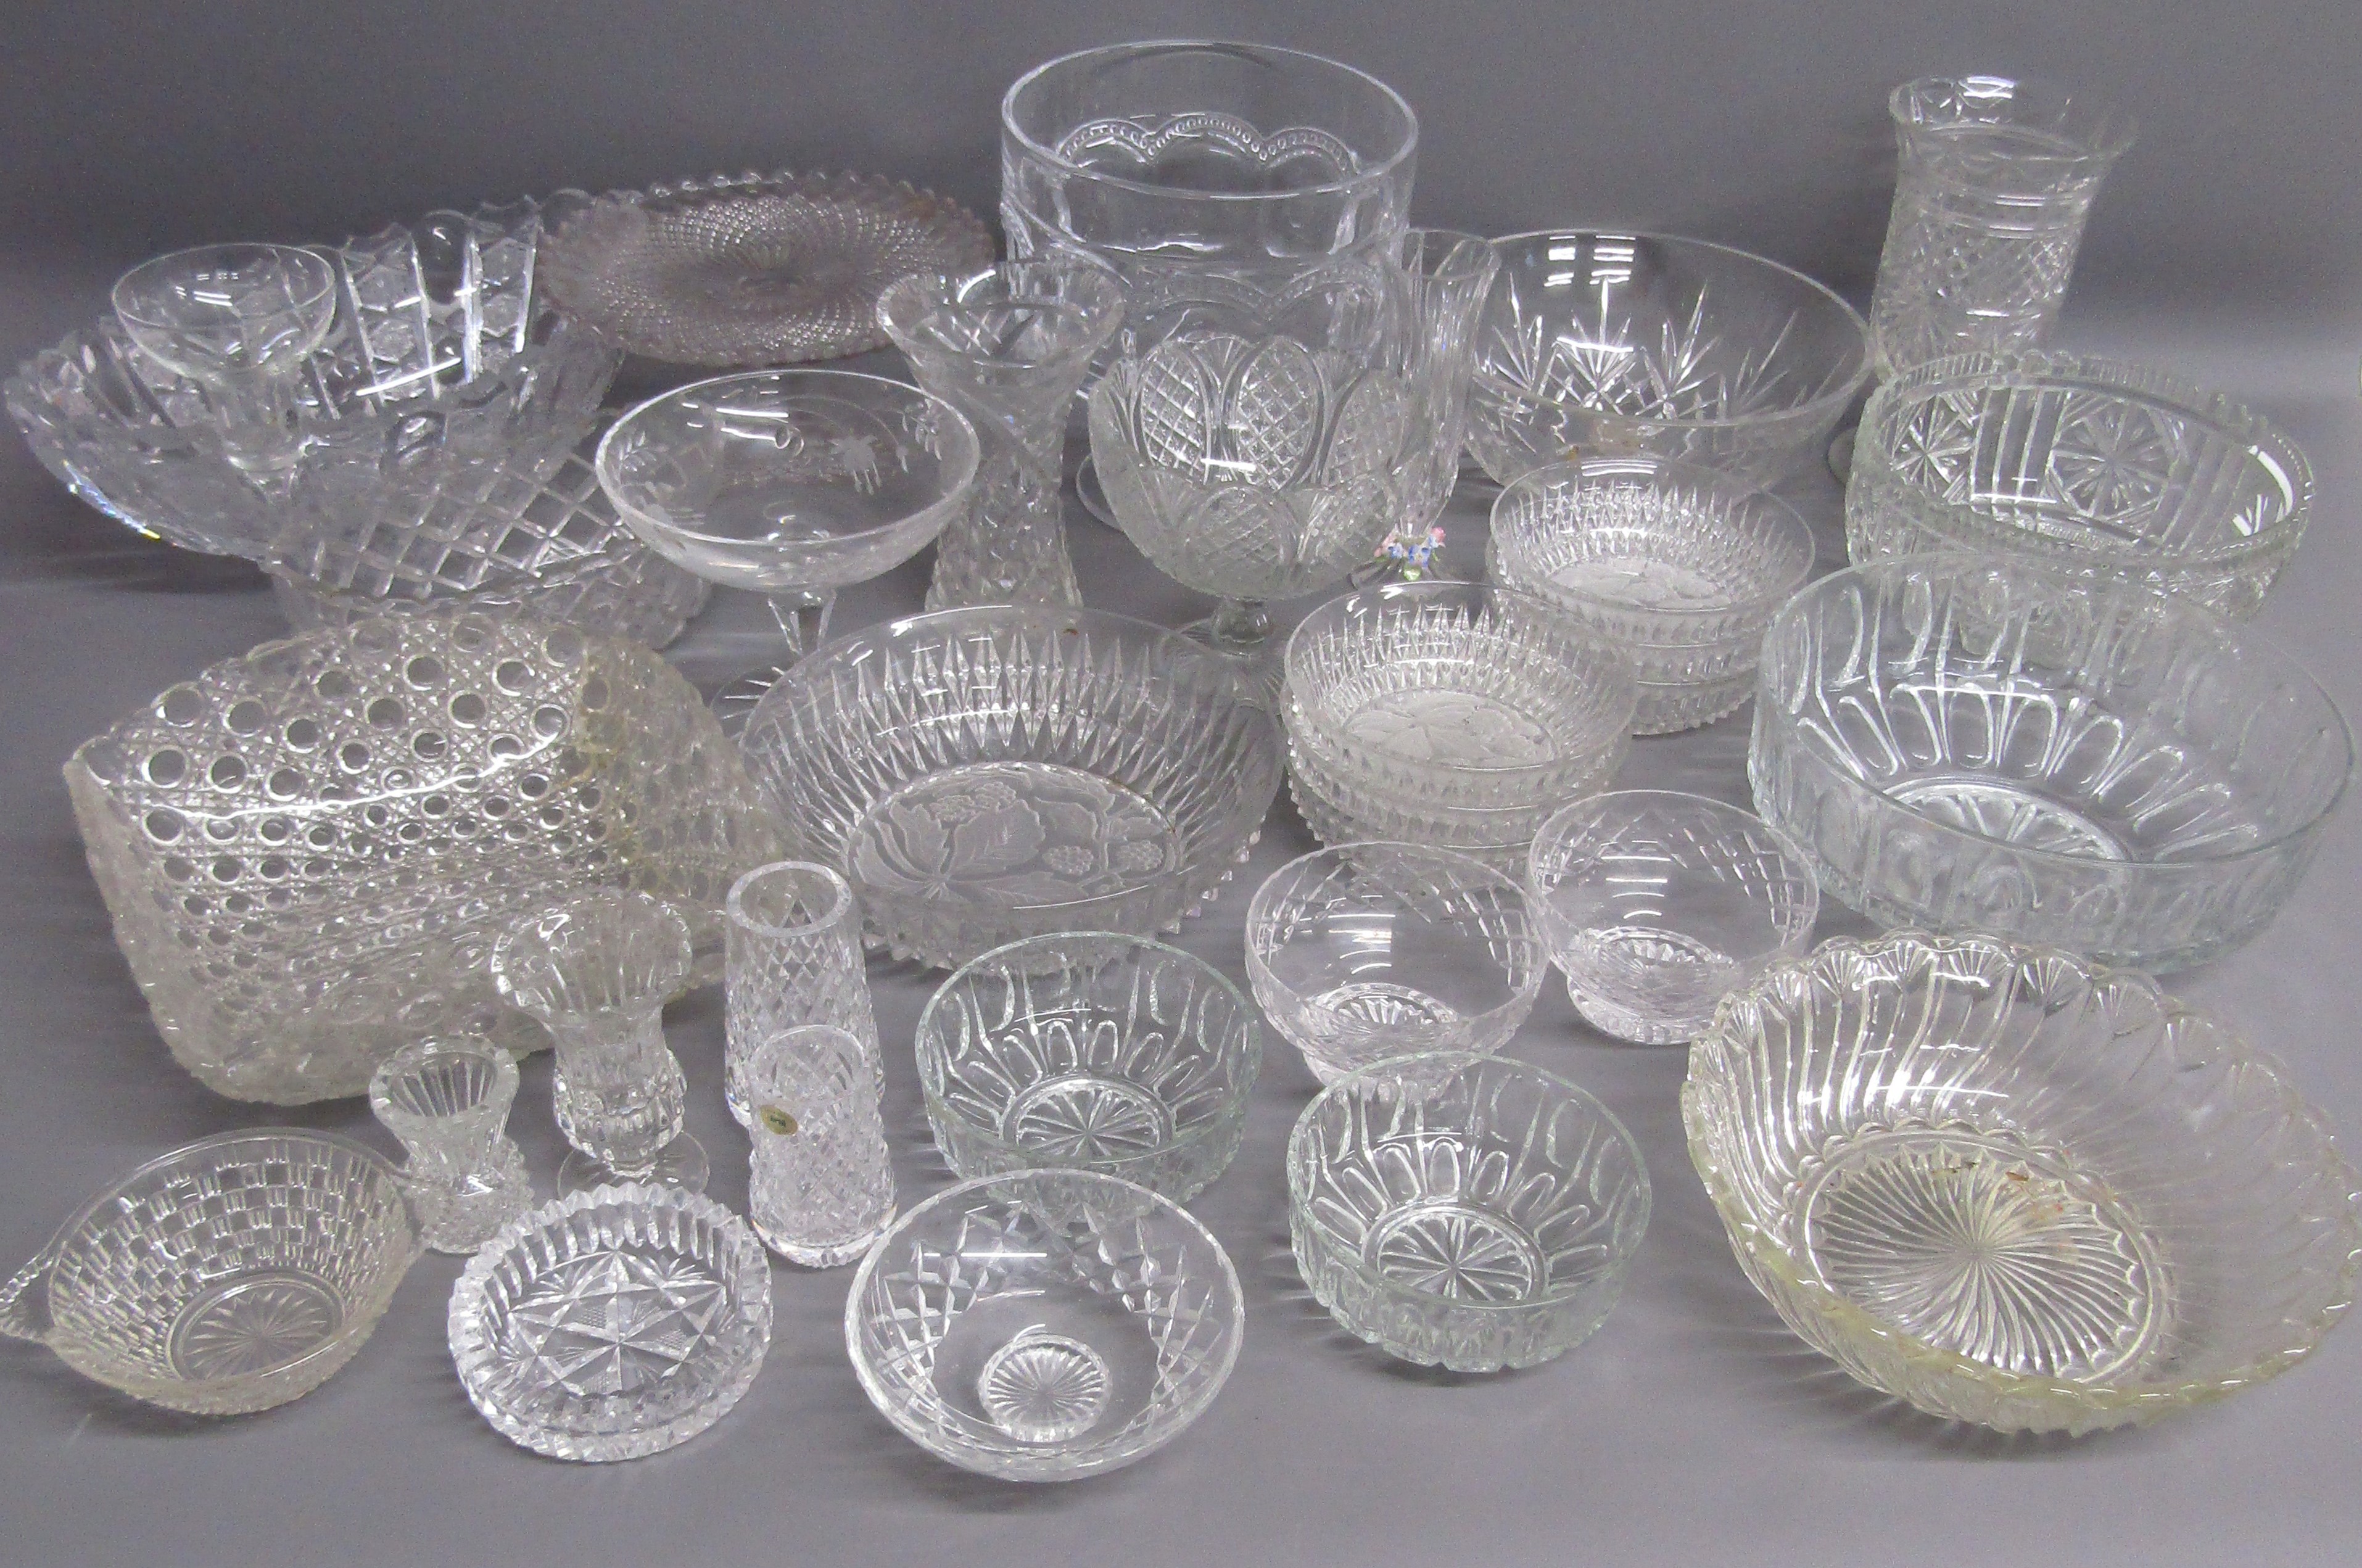 Collection of crystal and glassware, bowls, fruit set, cake stand, trifle dish, celery vase, etc